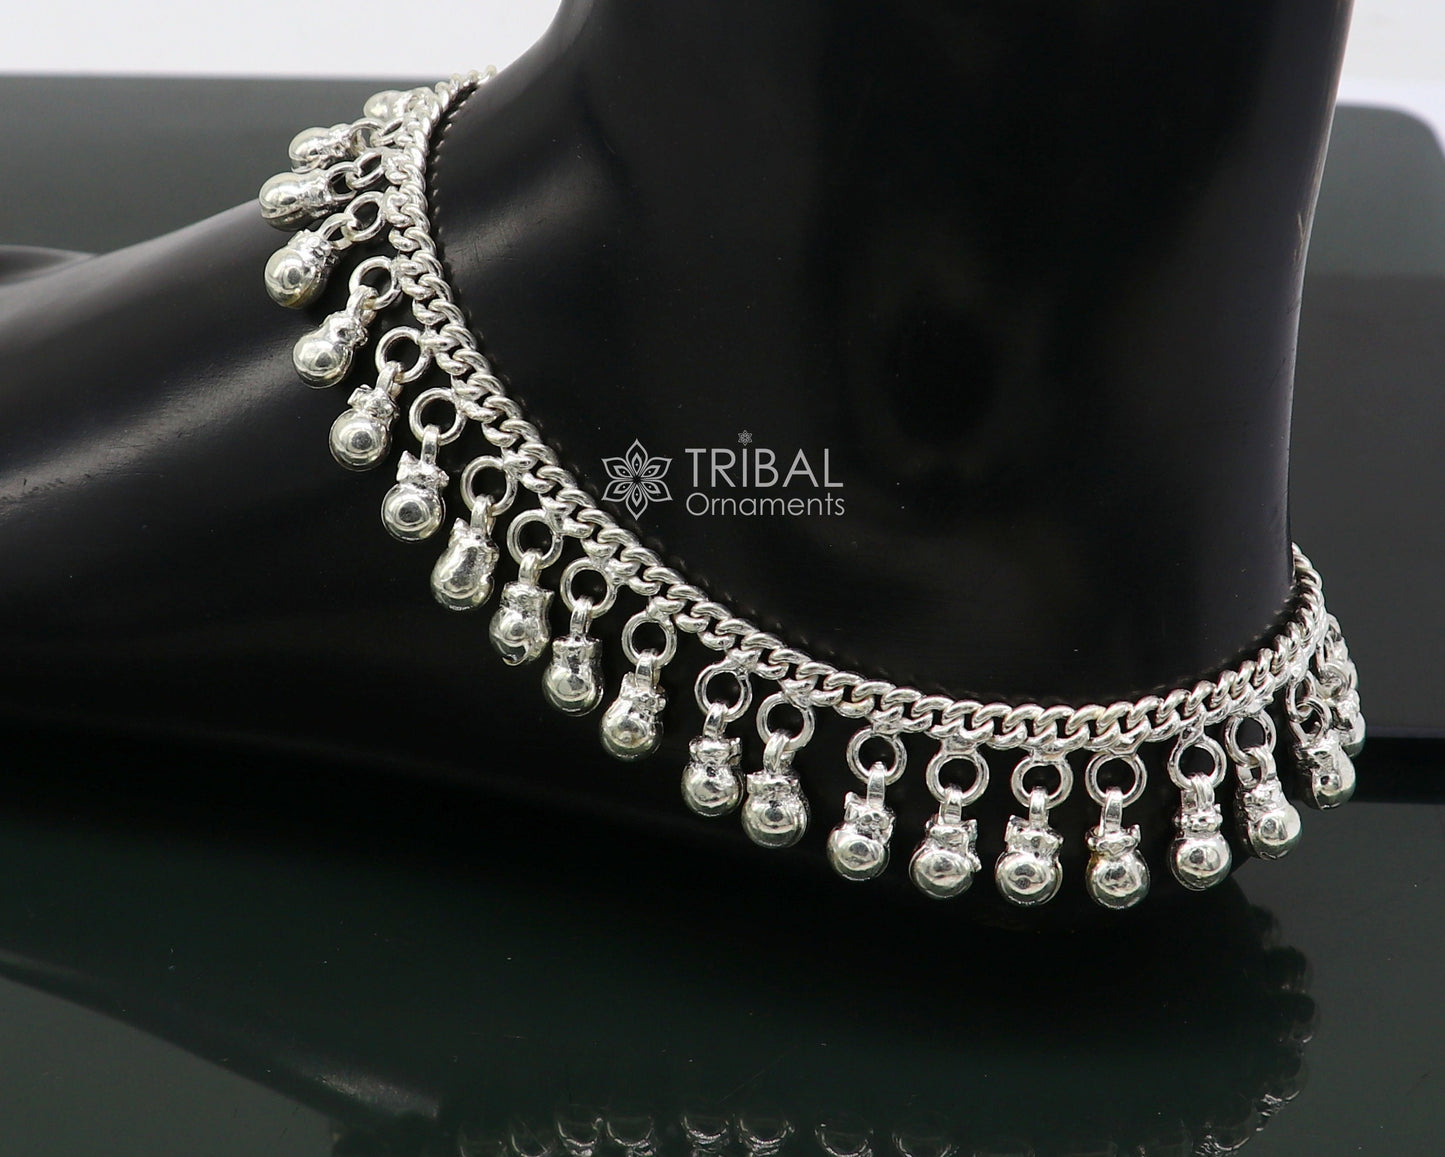 10.5" Long handmade sterling silver amazing hanging drops ankle bracelet, gorgeous charm anklets belly dance ethnic tribal jewelry ank539 - TRIBAL ORNAMENTS